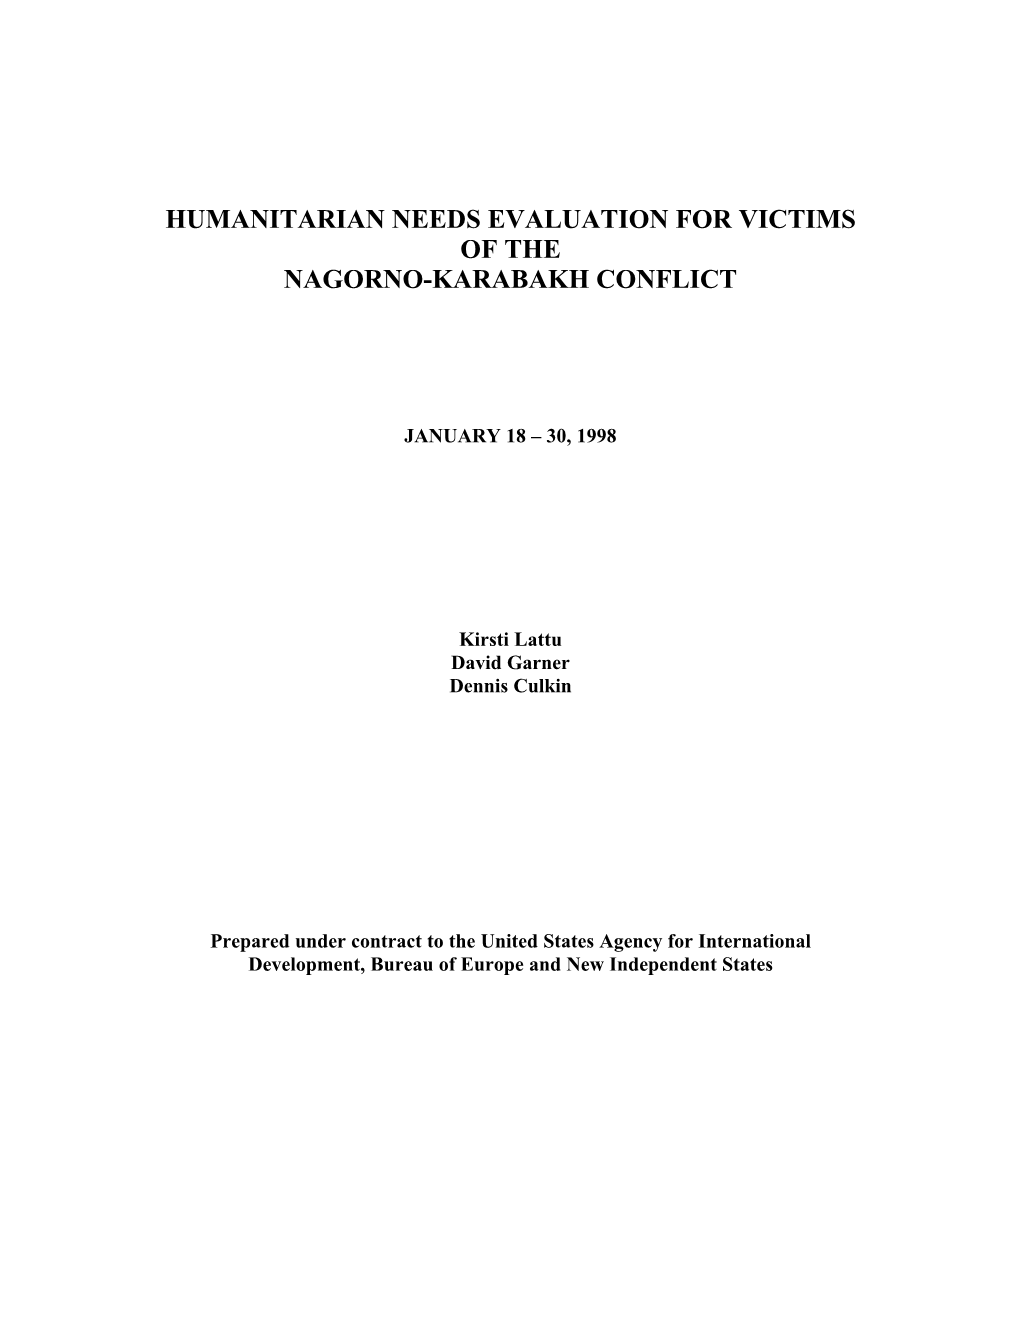 Humanitarian Needs Evaluation for Victims of the Nagorno-Karabakh Conflict